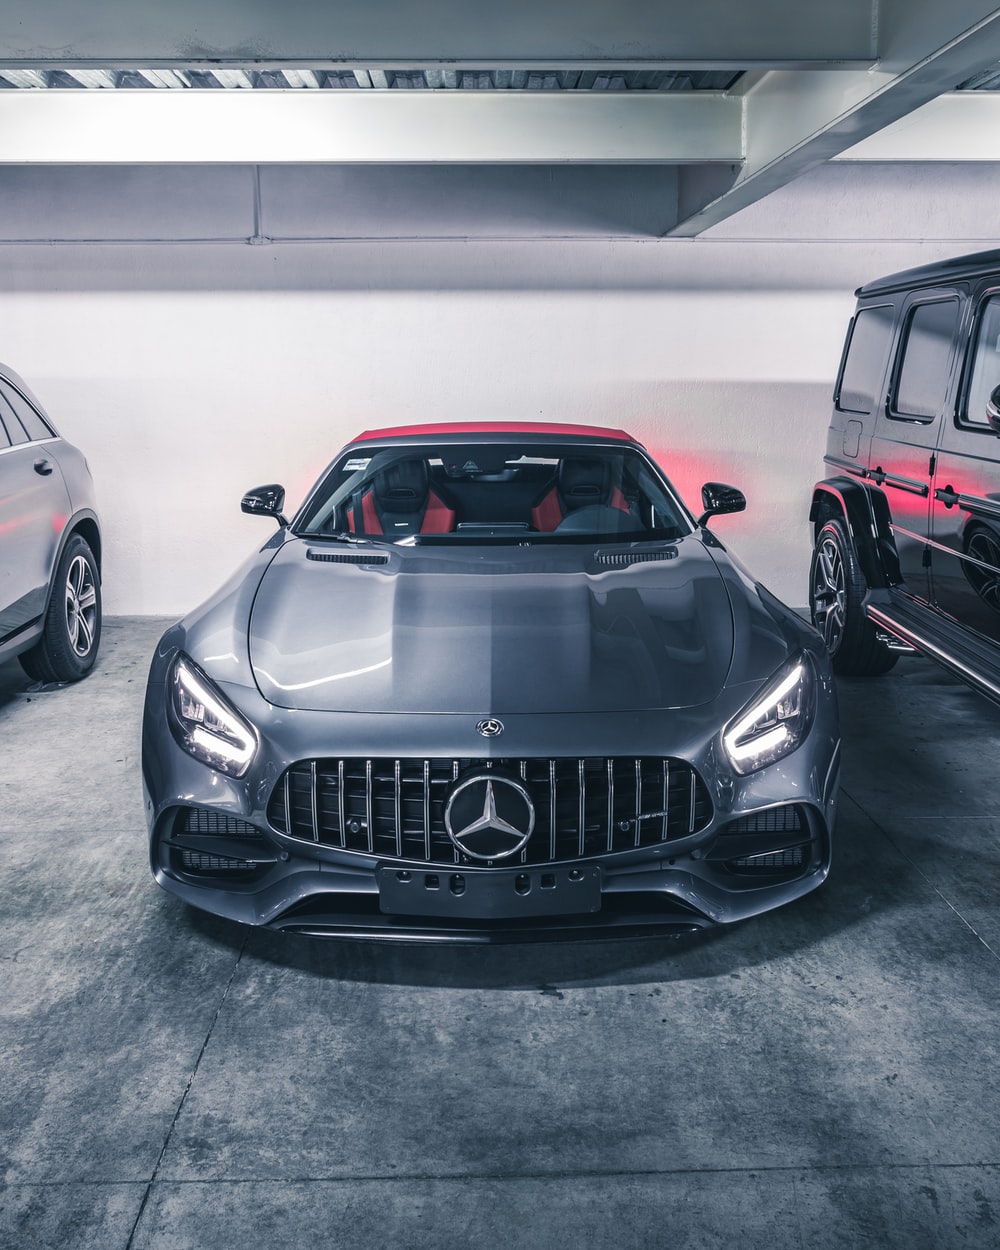 Amg Gt Picture [HD]. Download Free Image